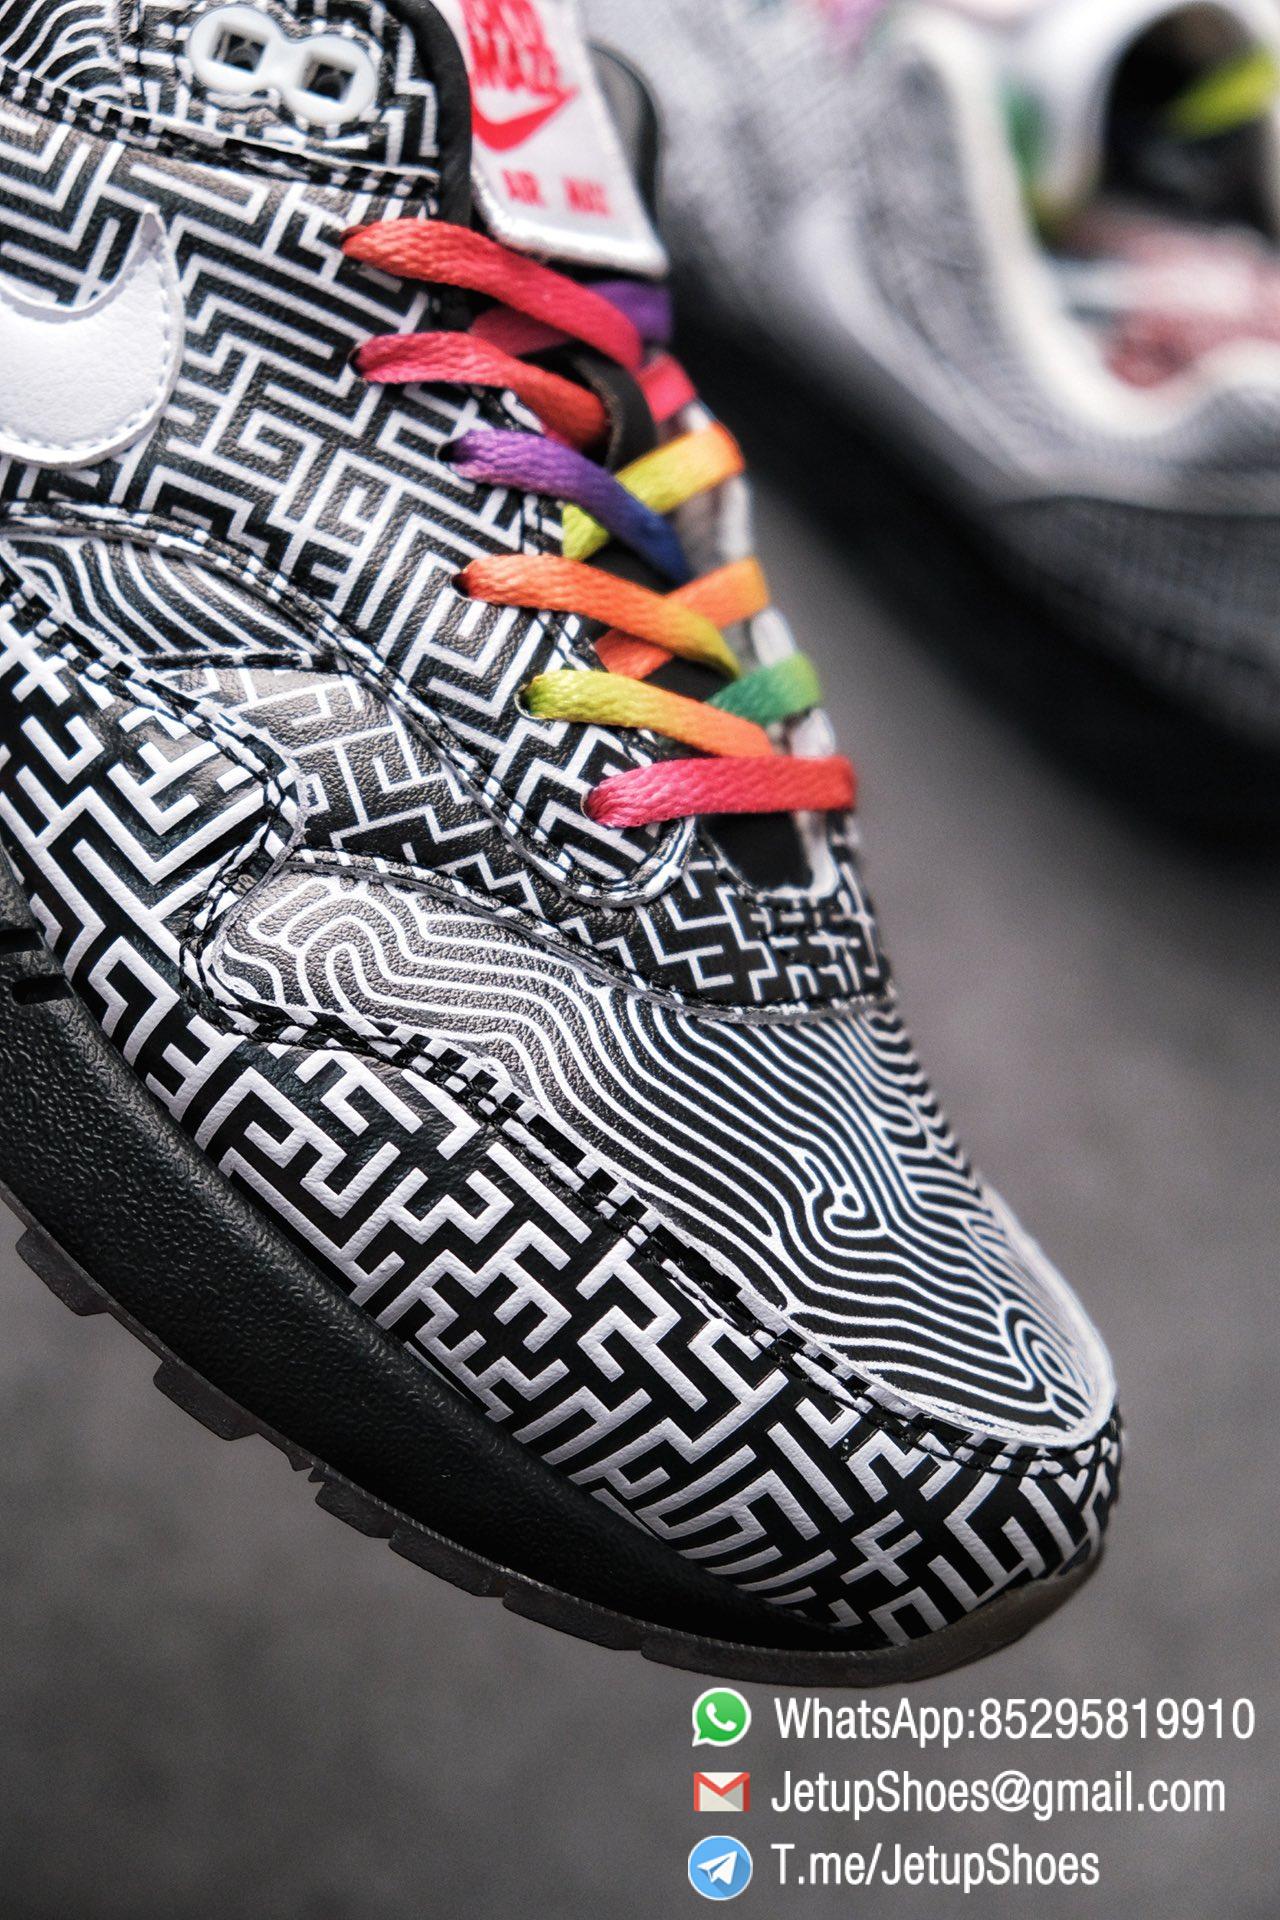 Best Replica Sneakers Nike Air Max 1 On Air Tokyo Maze Monochromatic Labyrinth Leather Upper Rainbow Colored Laces 04